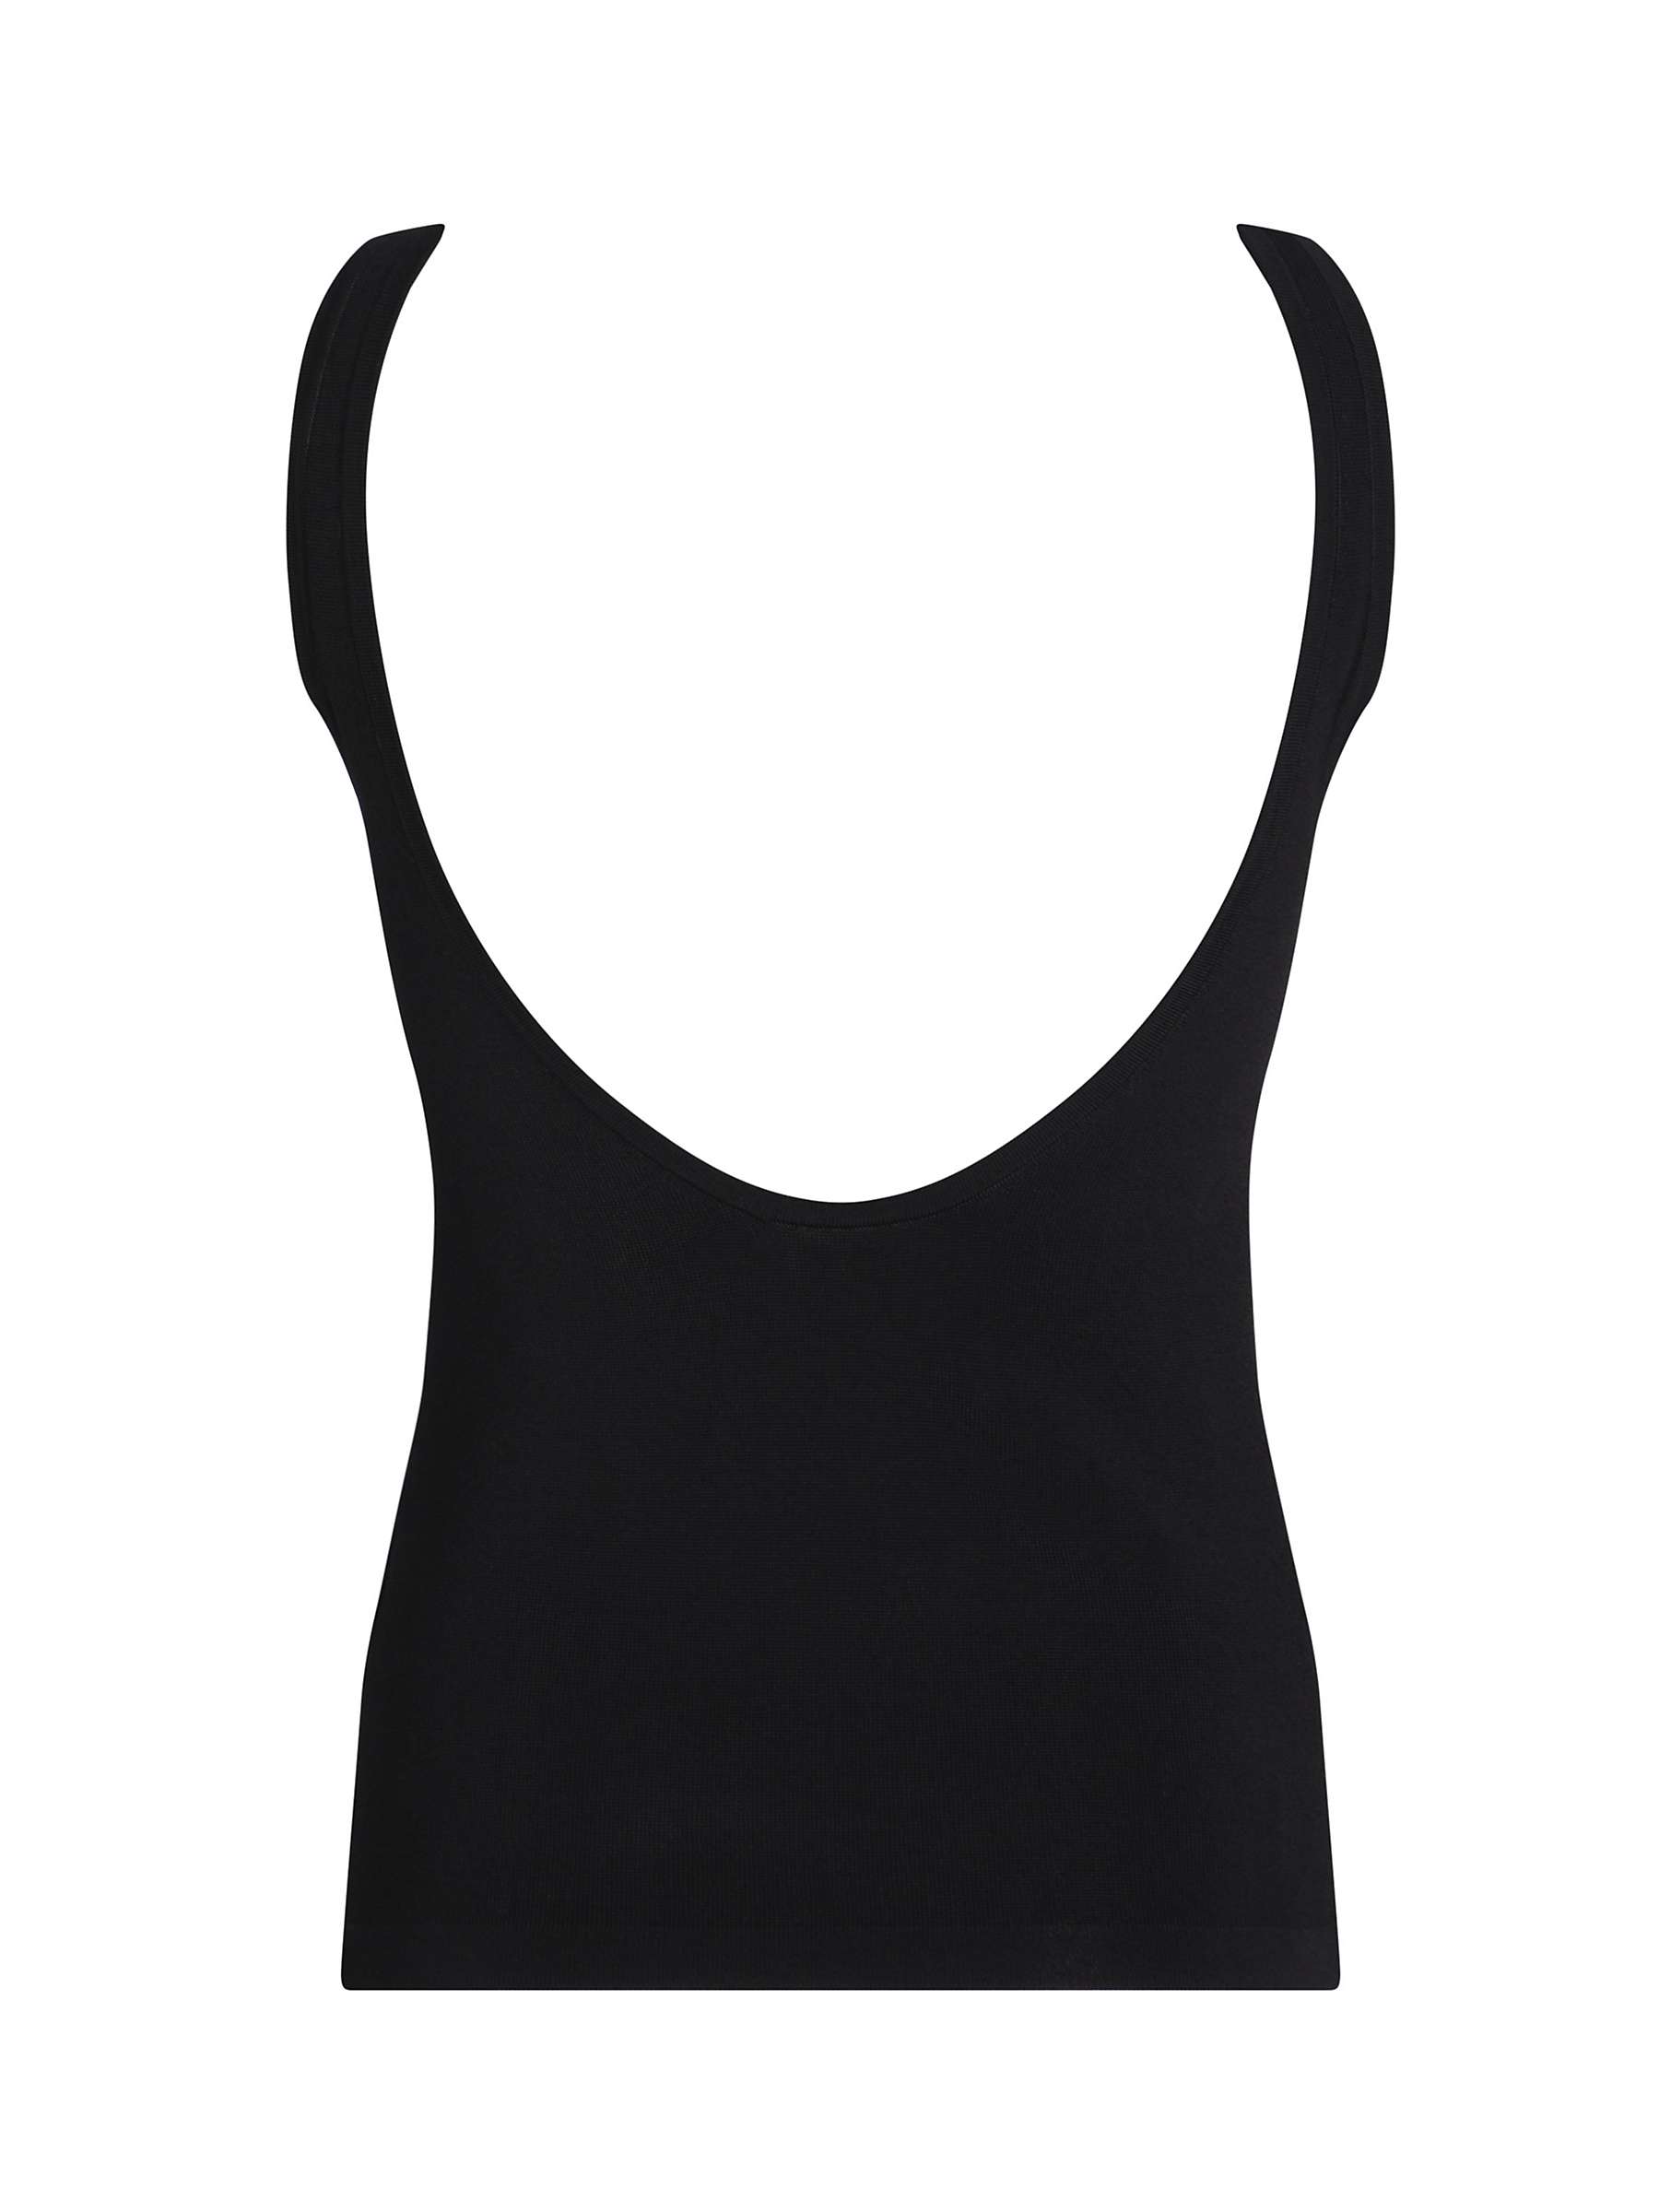 Buy Calvin Klein Archieve Knitted Tank Top, Black Online at johnlewis.com